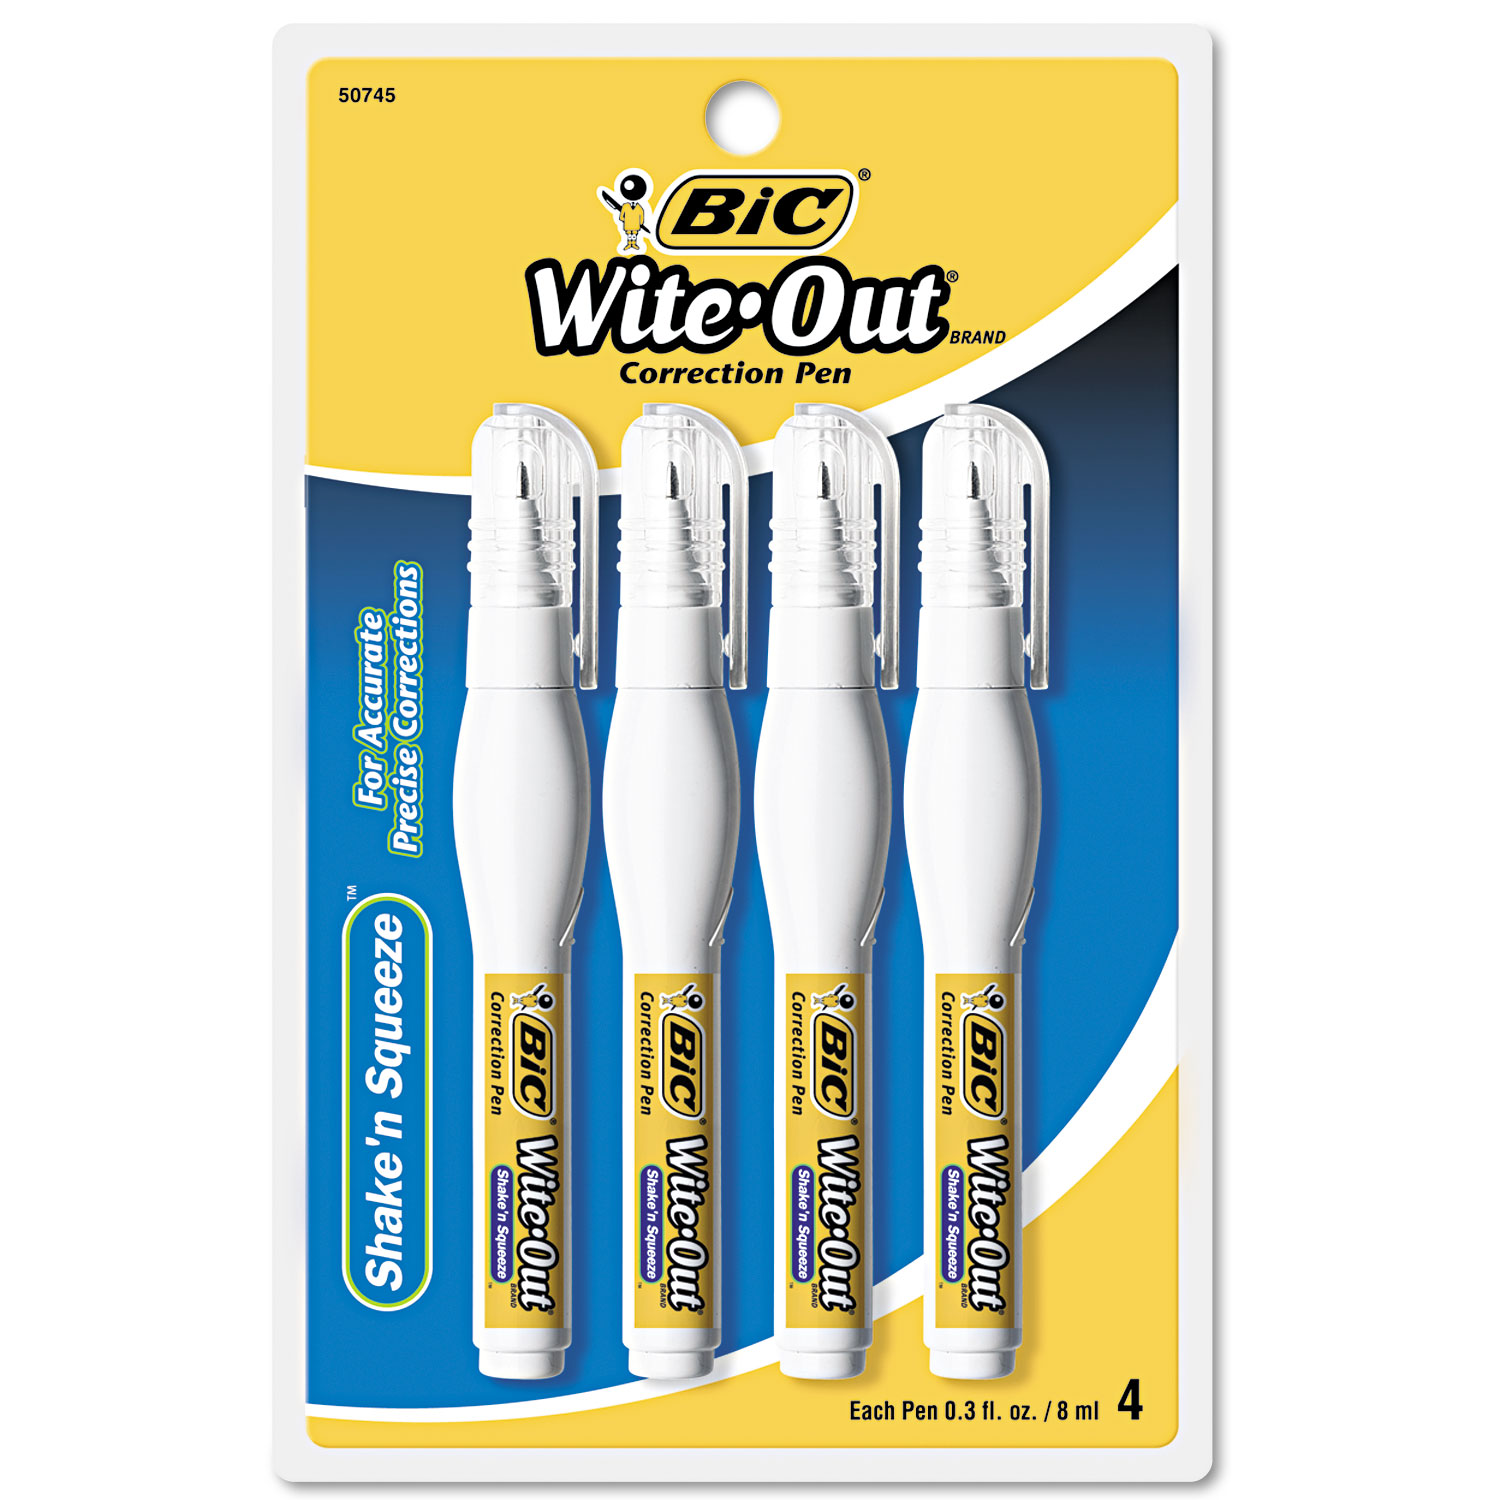  BIC WOSQPP418 Wite-Out Shake 'n Squeeze Correction Pen, 8 mL, White, 4/Pack (BICWOSQPP418) 